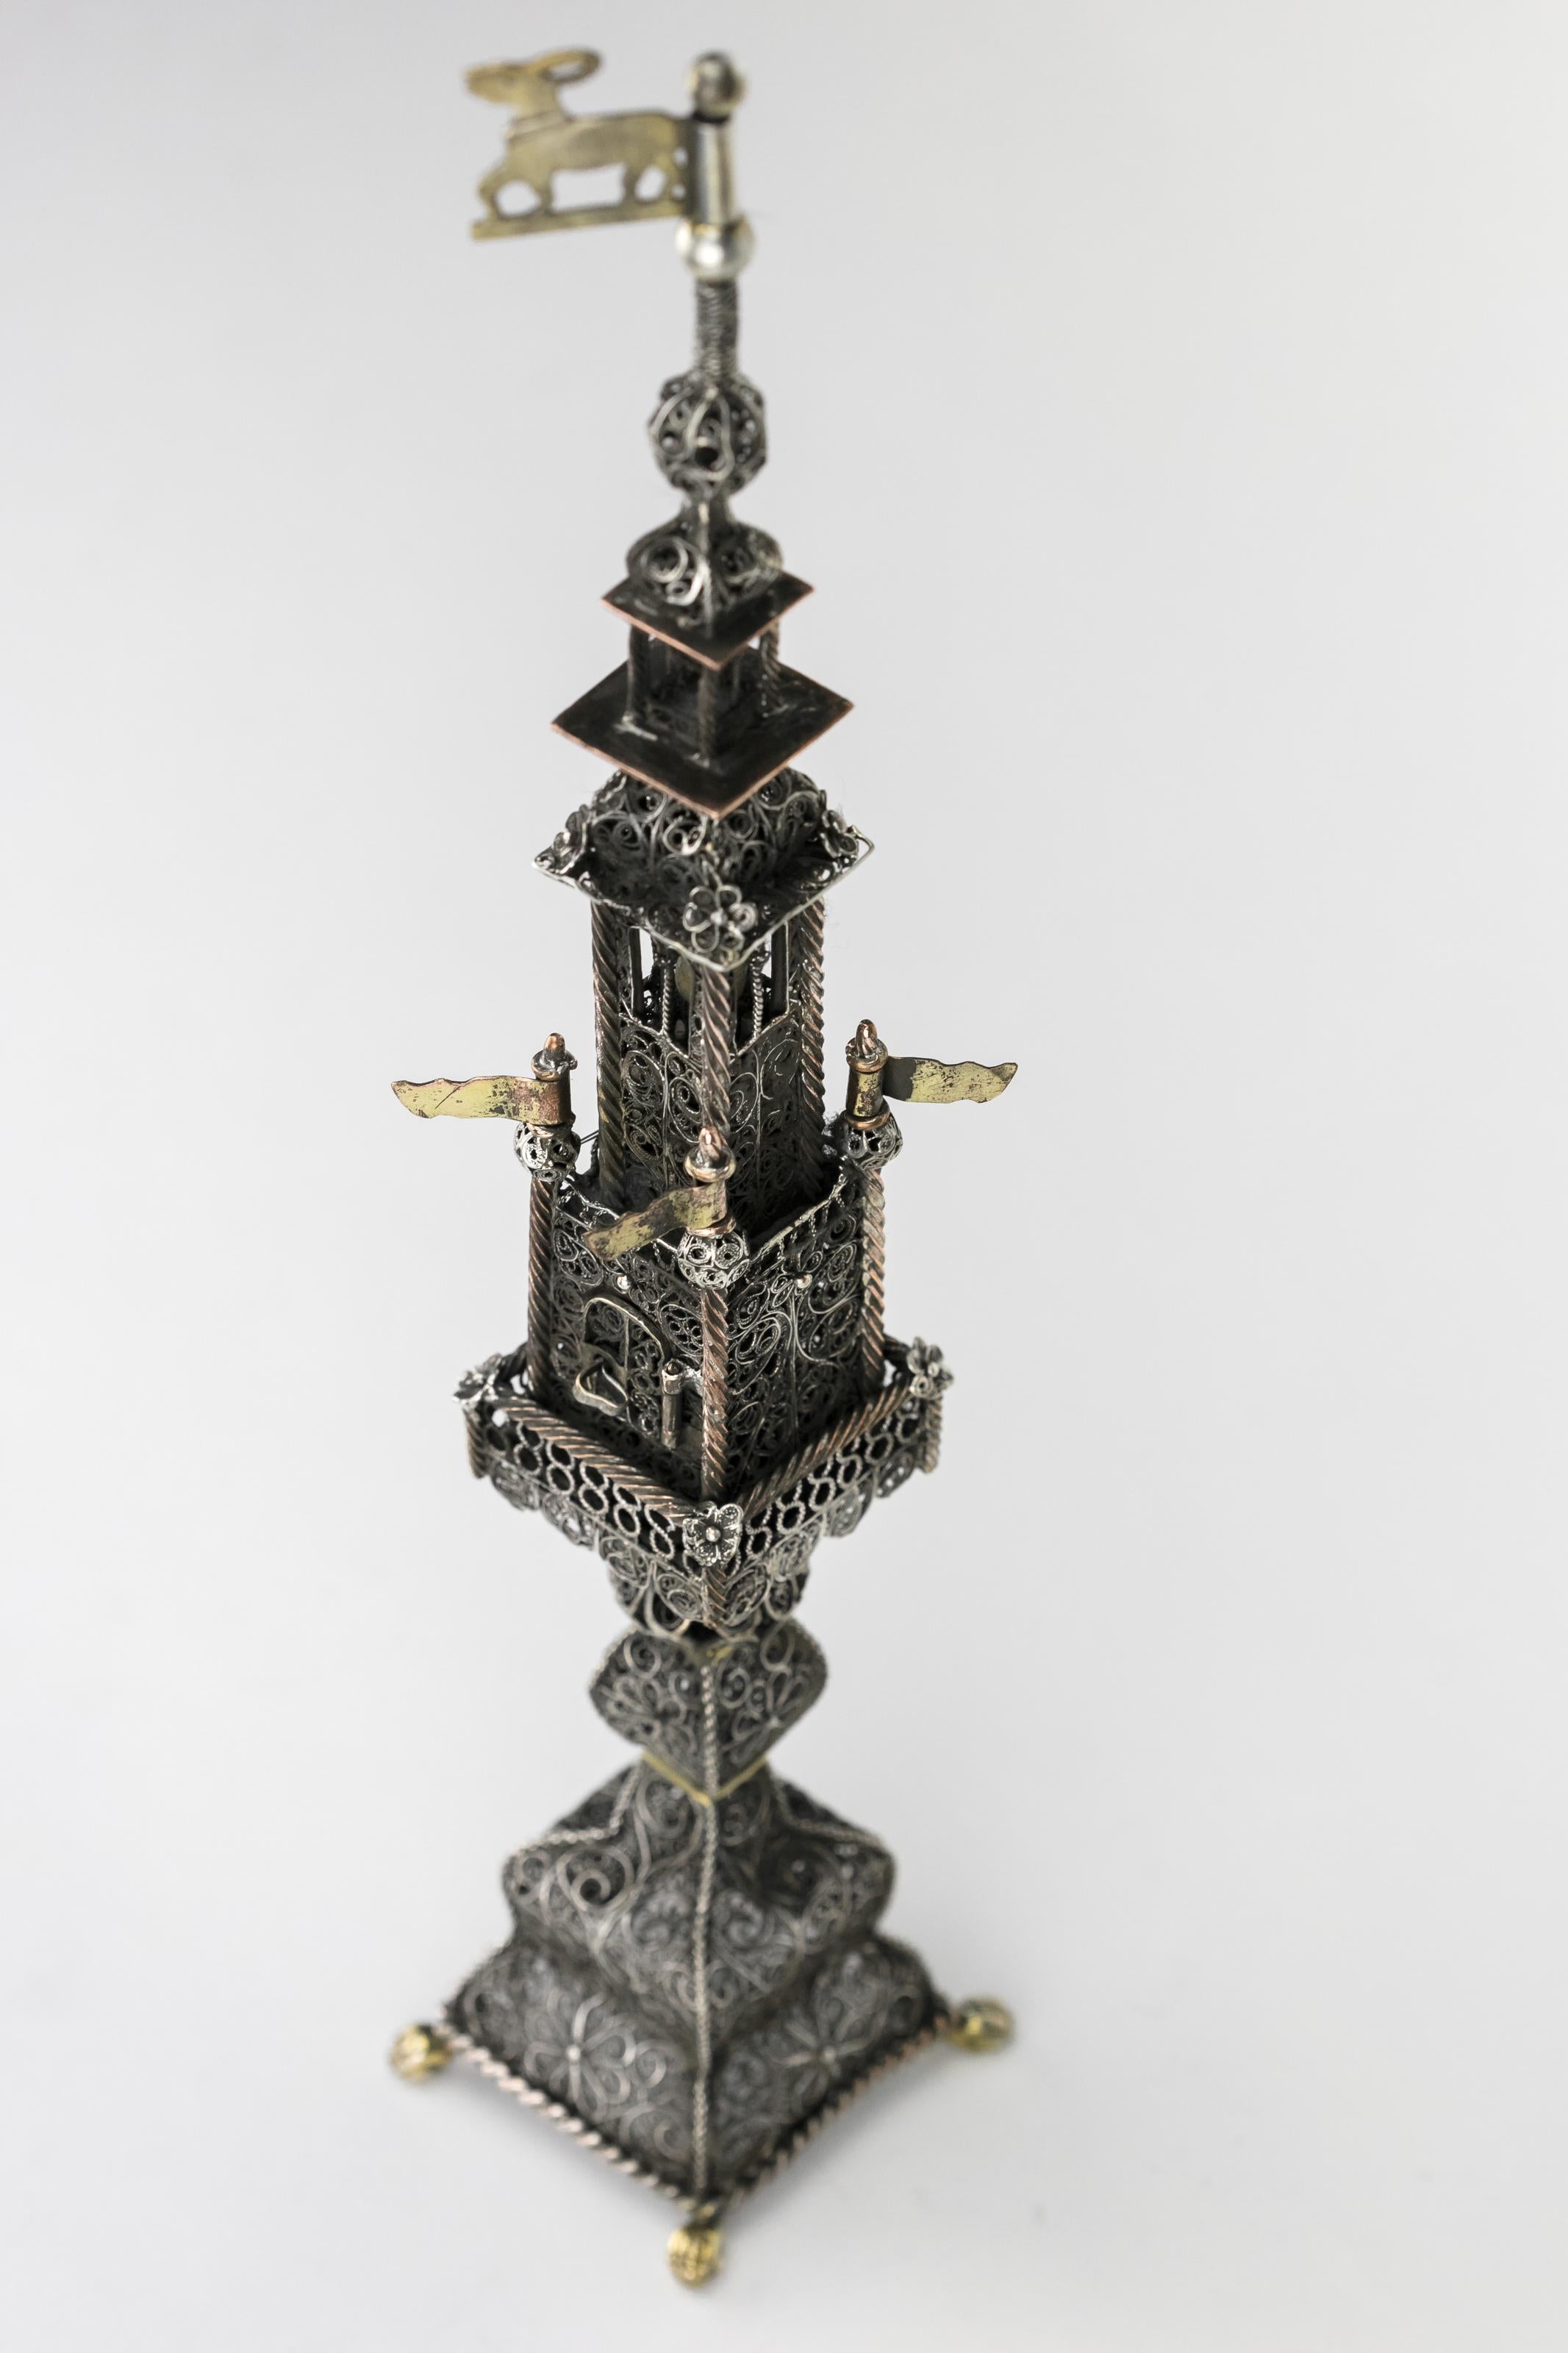 Silver filigree spice tower, Lemberg, Habsburg Empire, circa 1770. 
Resting on four gilded ball-and-claw feet, this tall tower (13.5 inches in height), is one of a group of similarly constructed and sized silver filigree spice towers hailing from